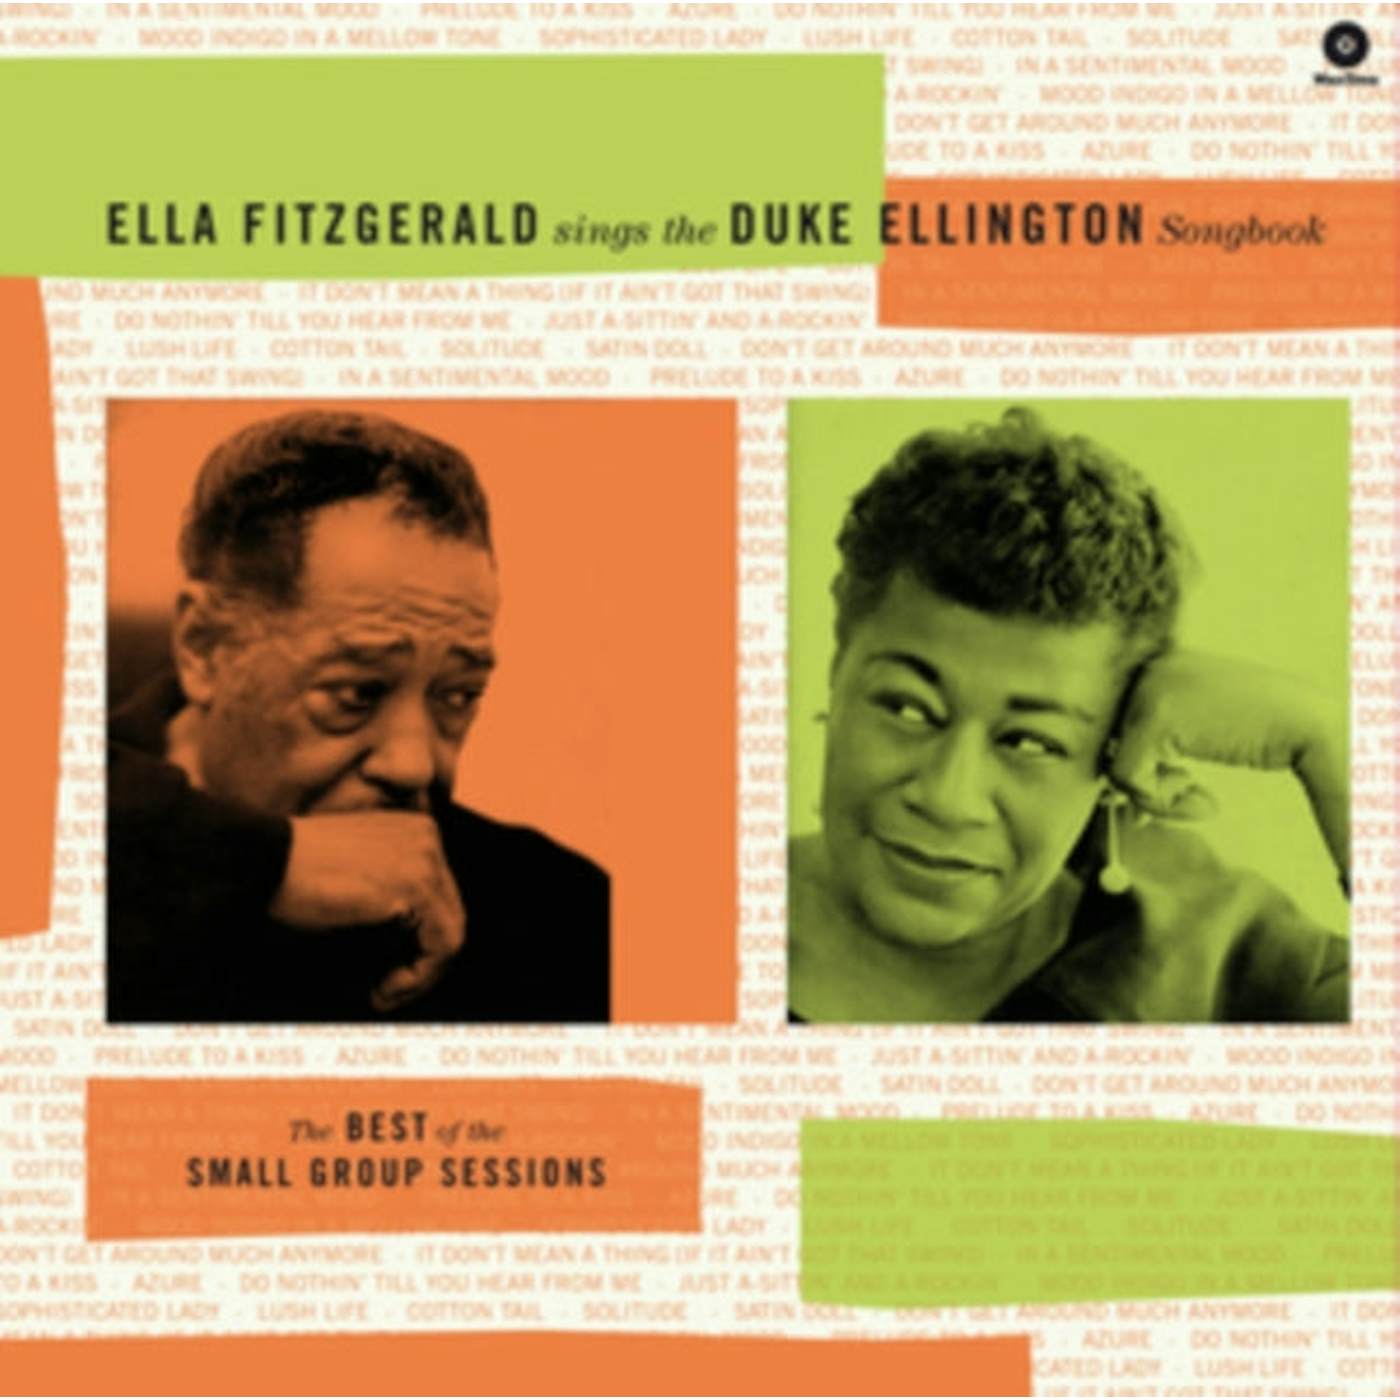 Ella Fitzgerald LP Vinyl Record - Sings The Duke Ellington Songbook - The Best Of The Small Group Sessions